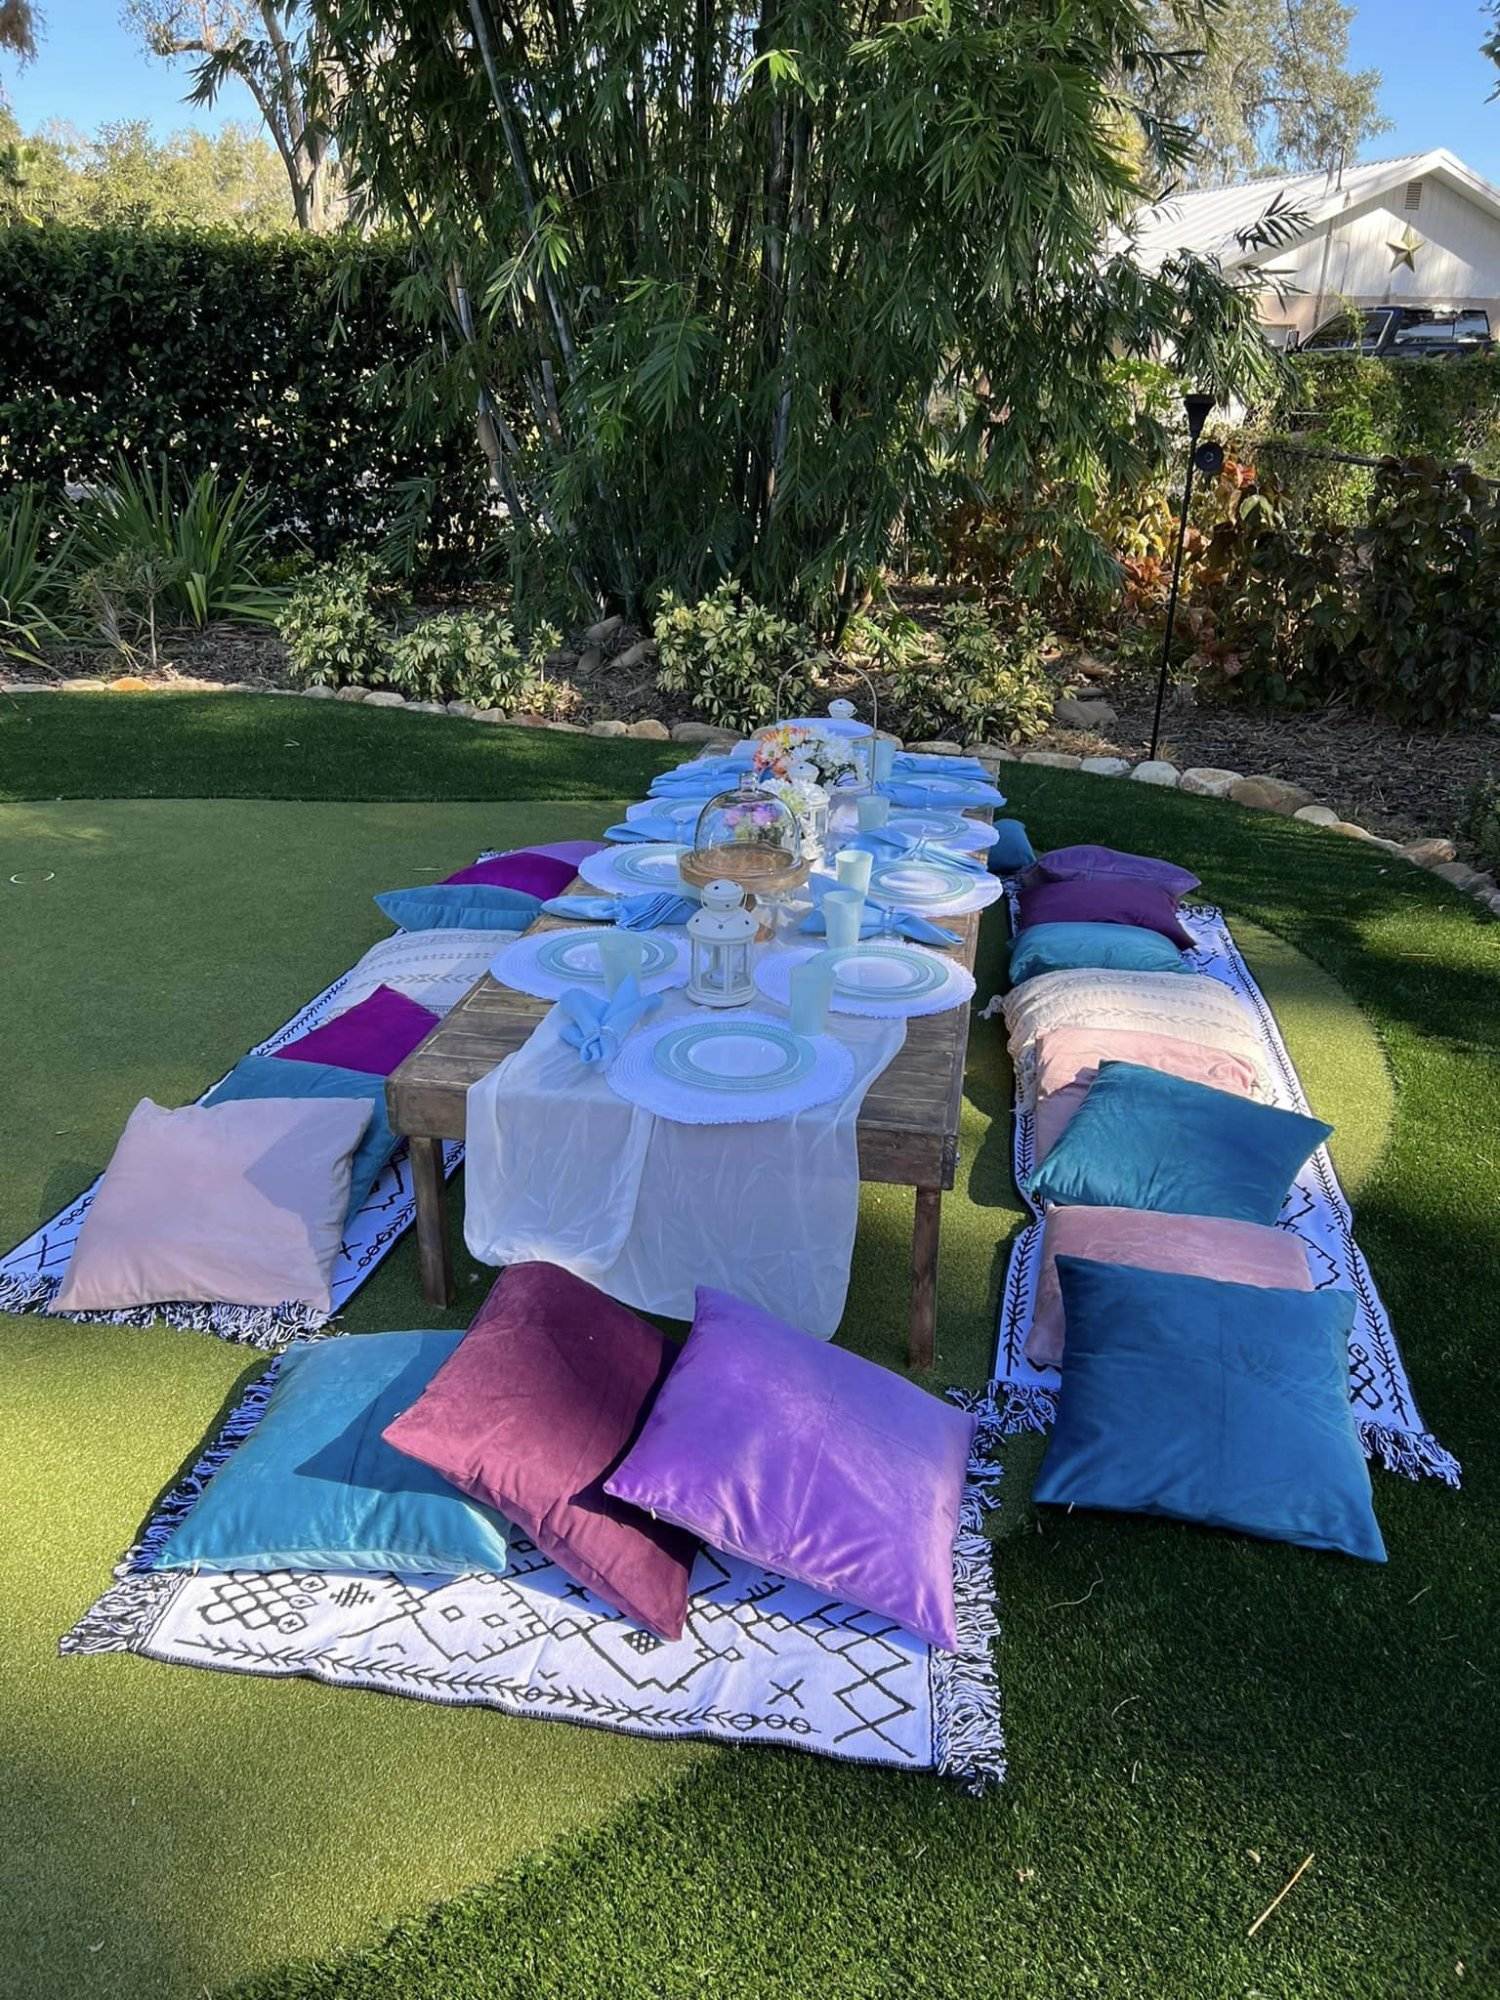 Outdoor dining setup on a lawn with a long table lined with blue and white tableware, surrounded by large cushions on a patterned rug, and tropical plants in the background, designed to entertain kids at